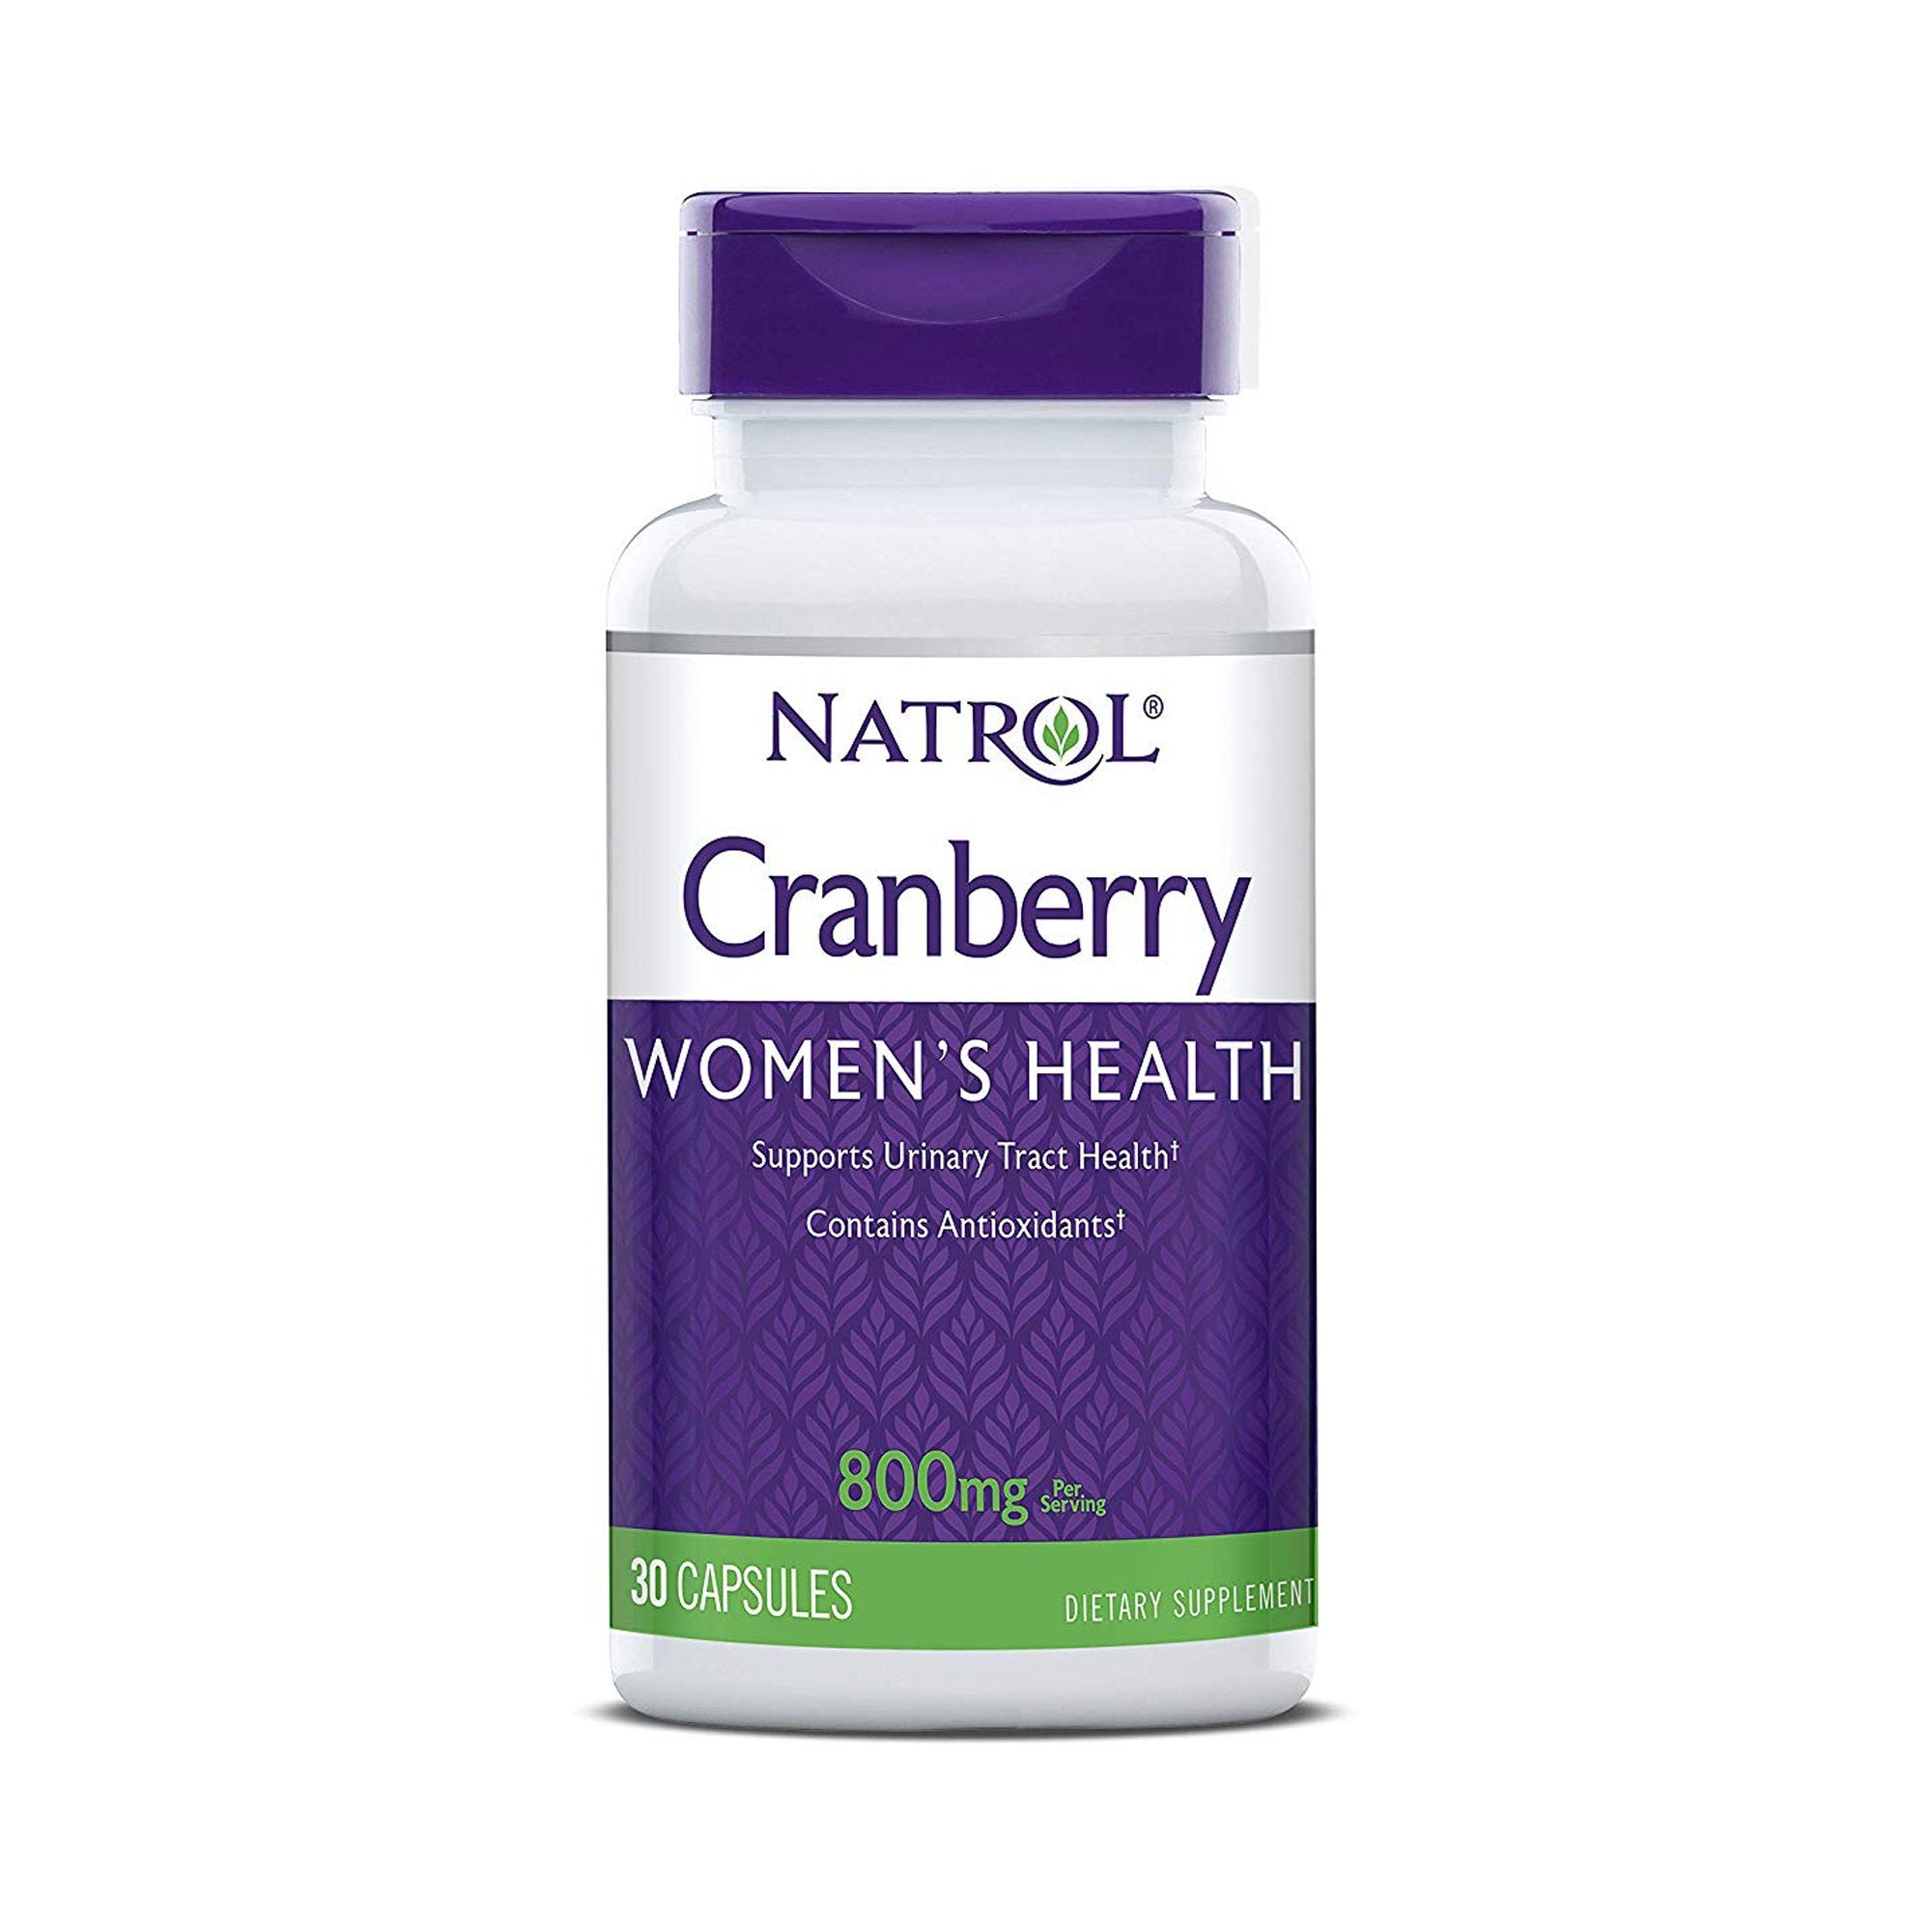 Dietary Supplement Natrol Cranberry Extract 800 mg Strength Capsule 30 per Bottle Cranberry Flavor